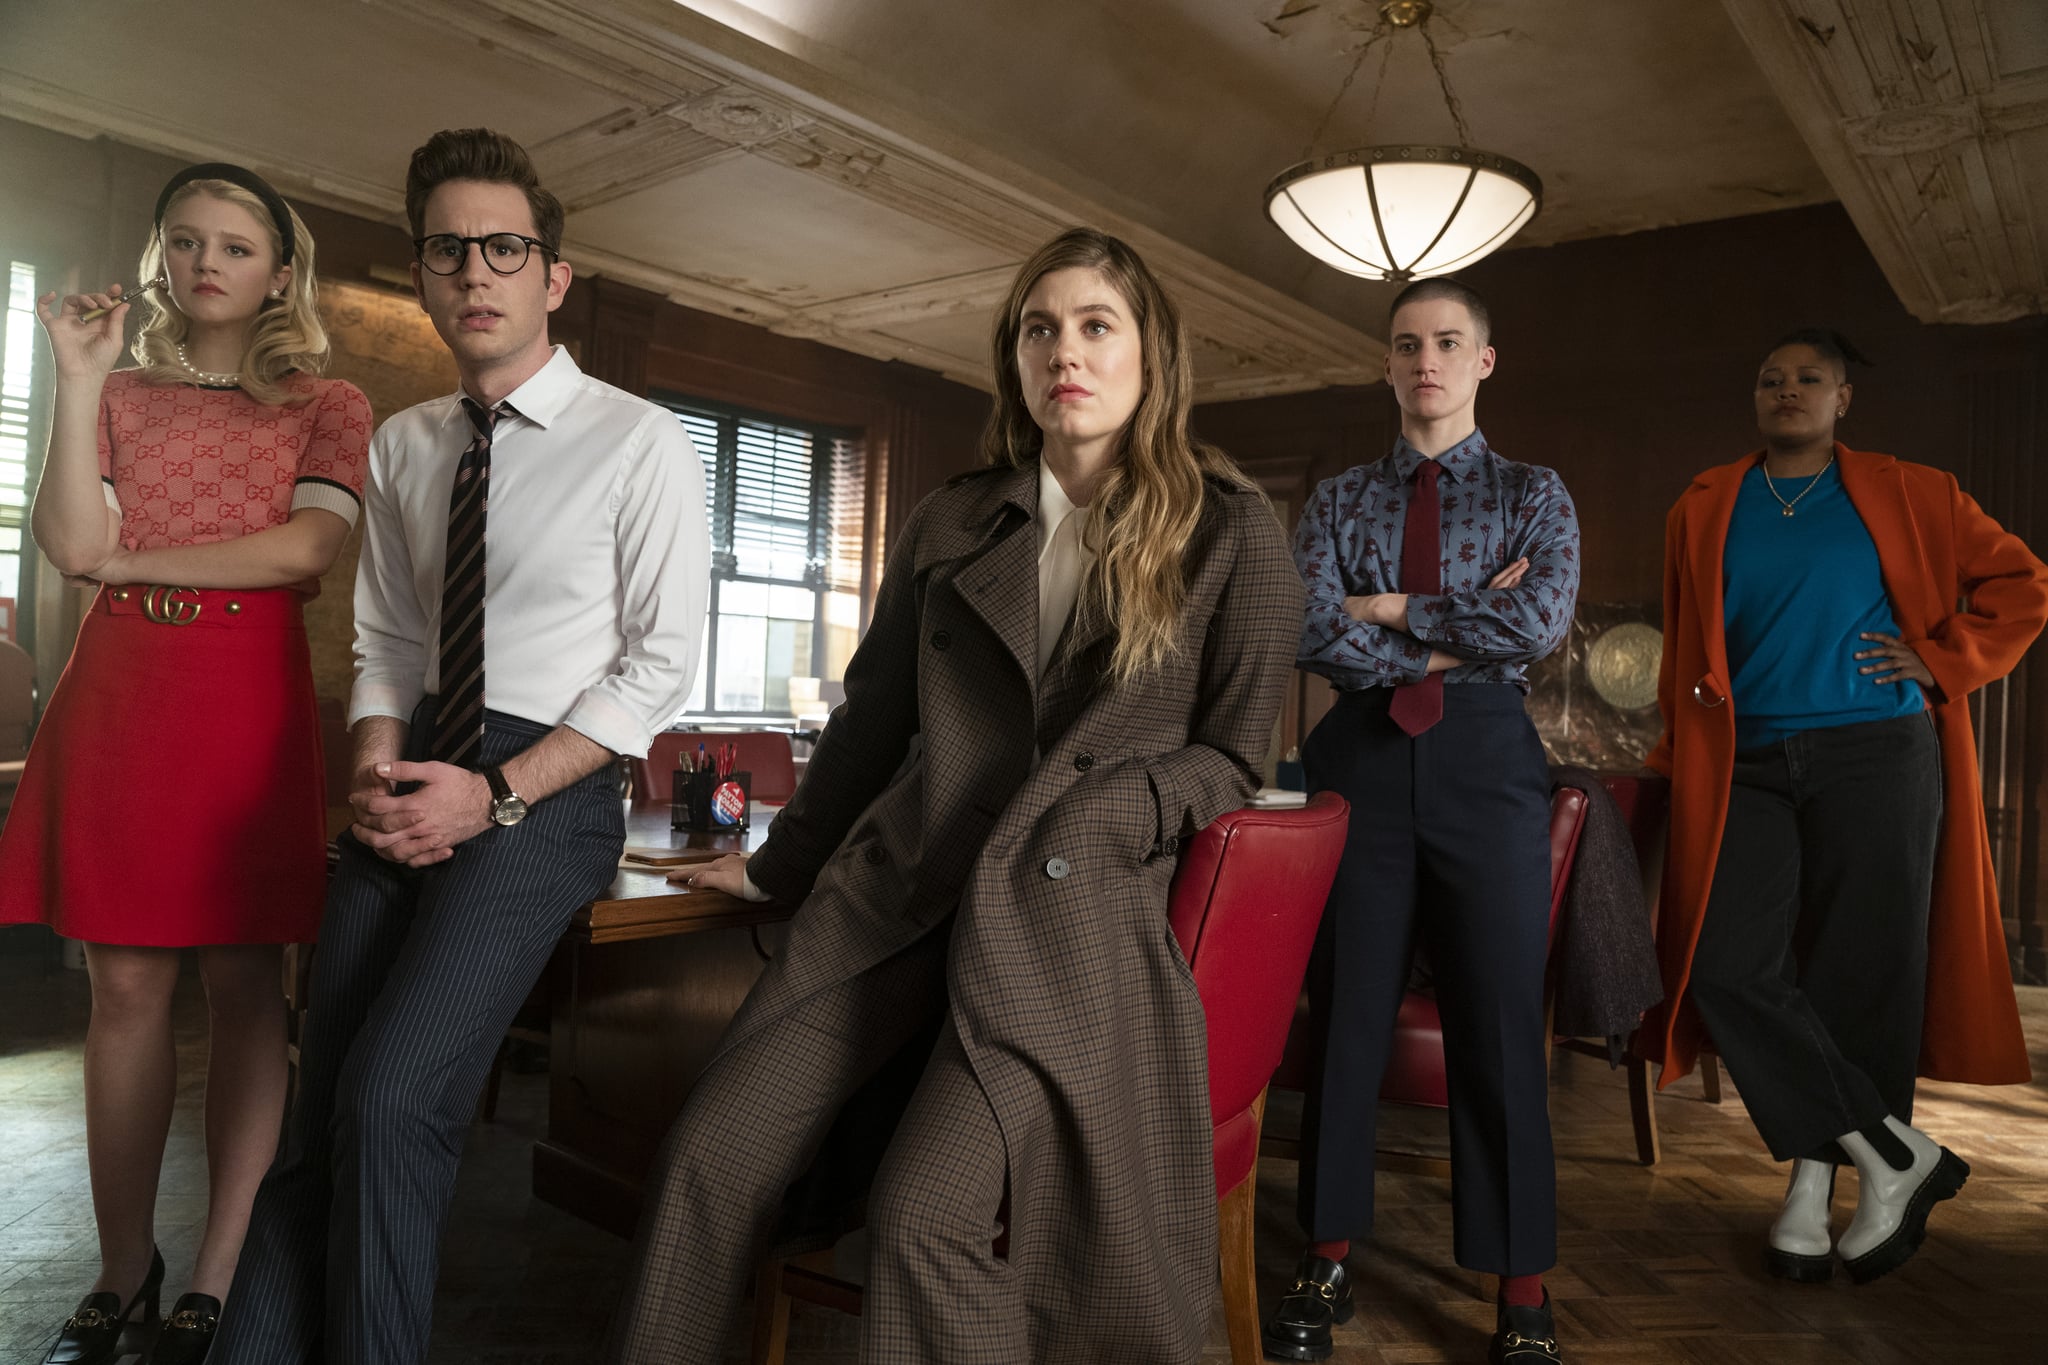 THE POLITICIAN (L to R) JULIA SCHLAEPFER as ALICE CHARLES, BEN PLATT as PAYTON HOBART, LAURA DREYFUSS as MCAFEE WESTBROOK, THEO GERMAINE as JAMES SULLIVAN, and RAHNE JONES as SKYE LEIGHTON in episode 2 of THE POLITICIAN. Cr. COURTESY OF NETFLIX/NETFLIX  2020